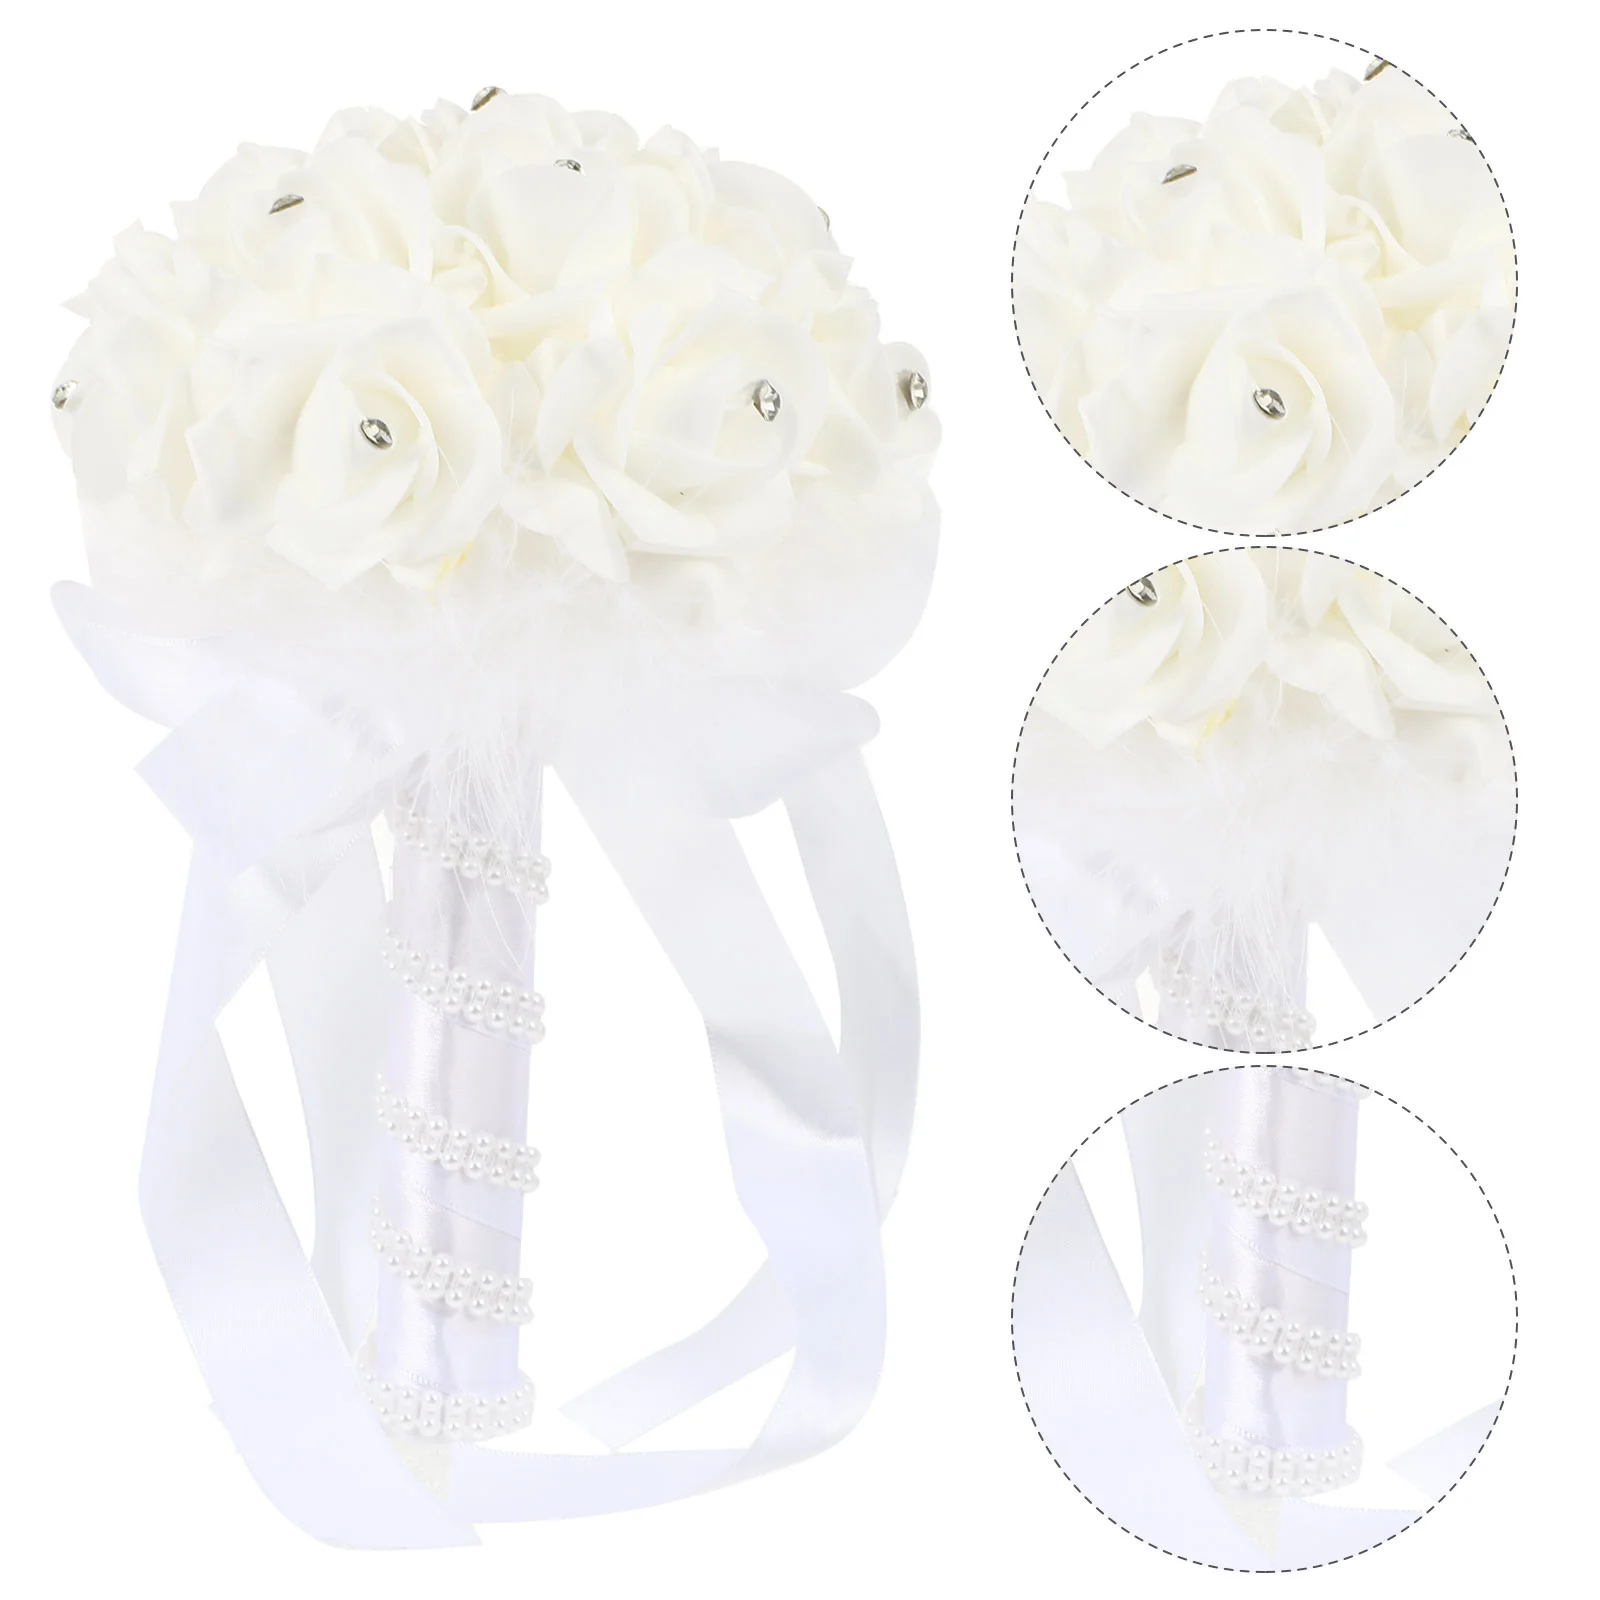 

Bouquet Bridal Flowers Flower Fake Wedding Artificial Hand Bride Holding Crystals Silk Bouquets Decor Roses Lace Ribbons Soft